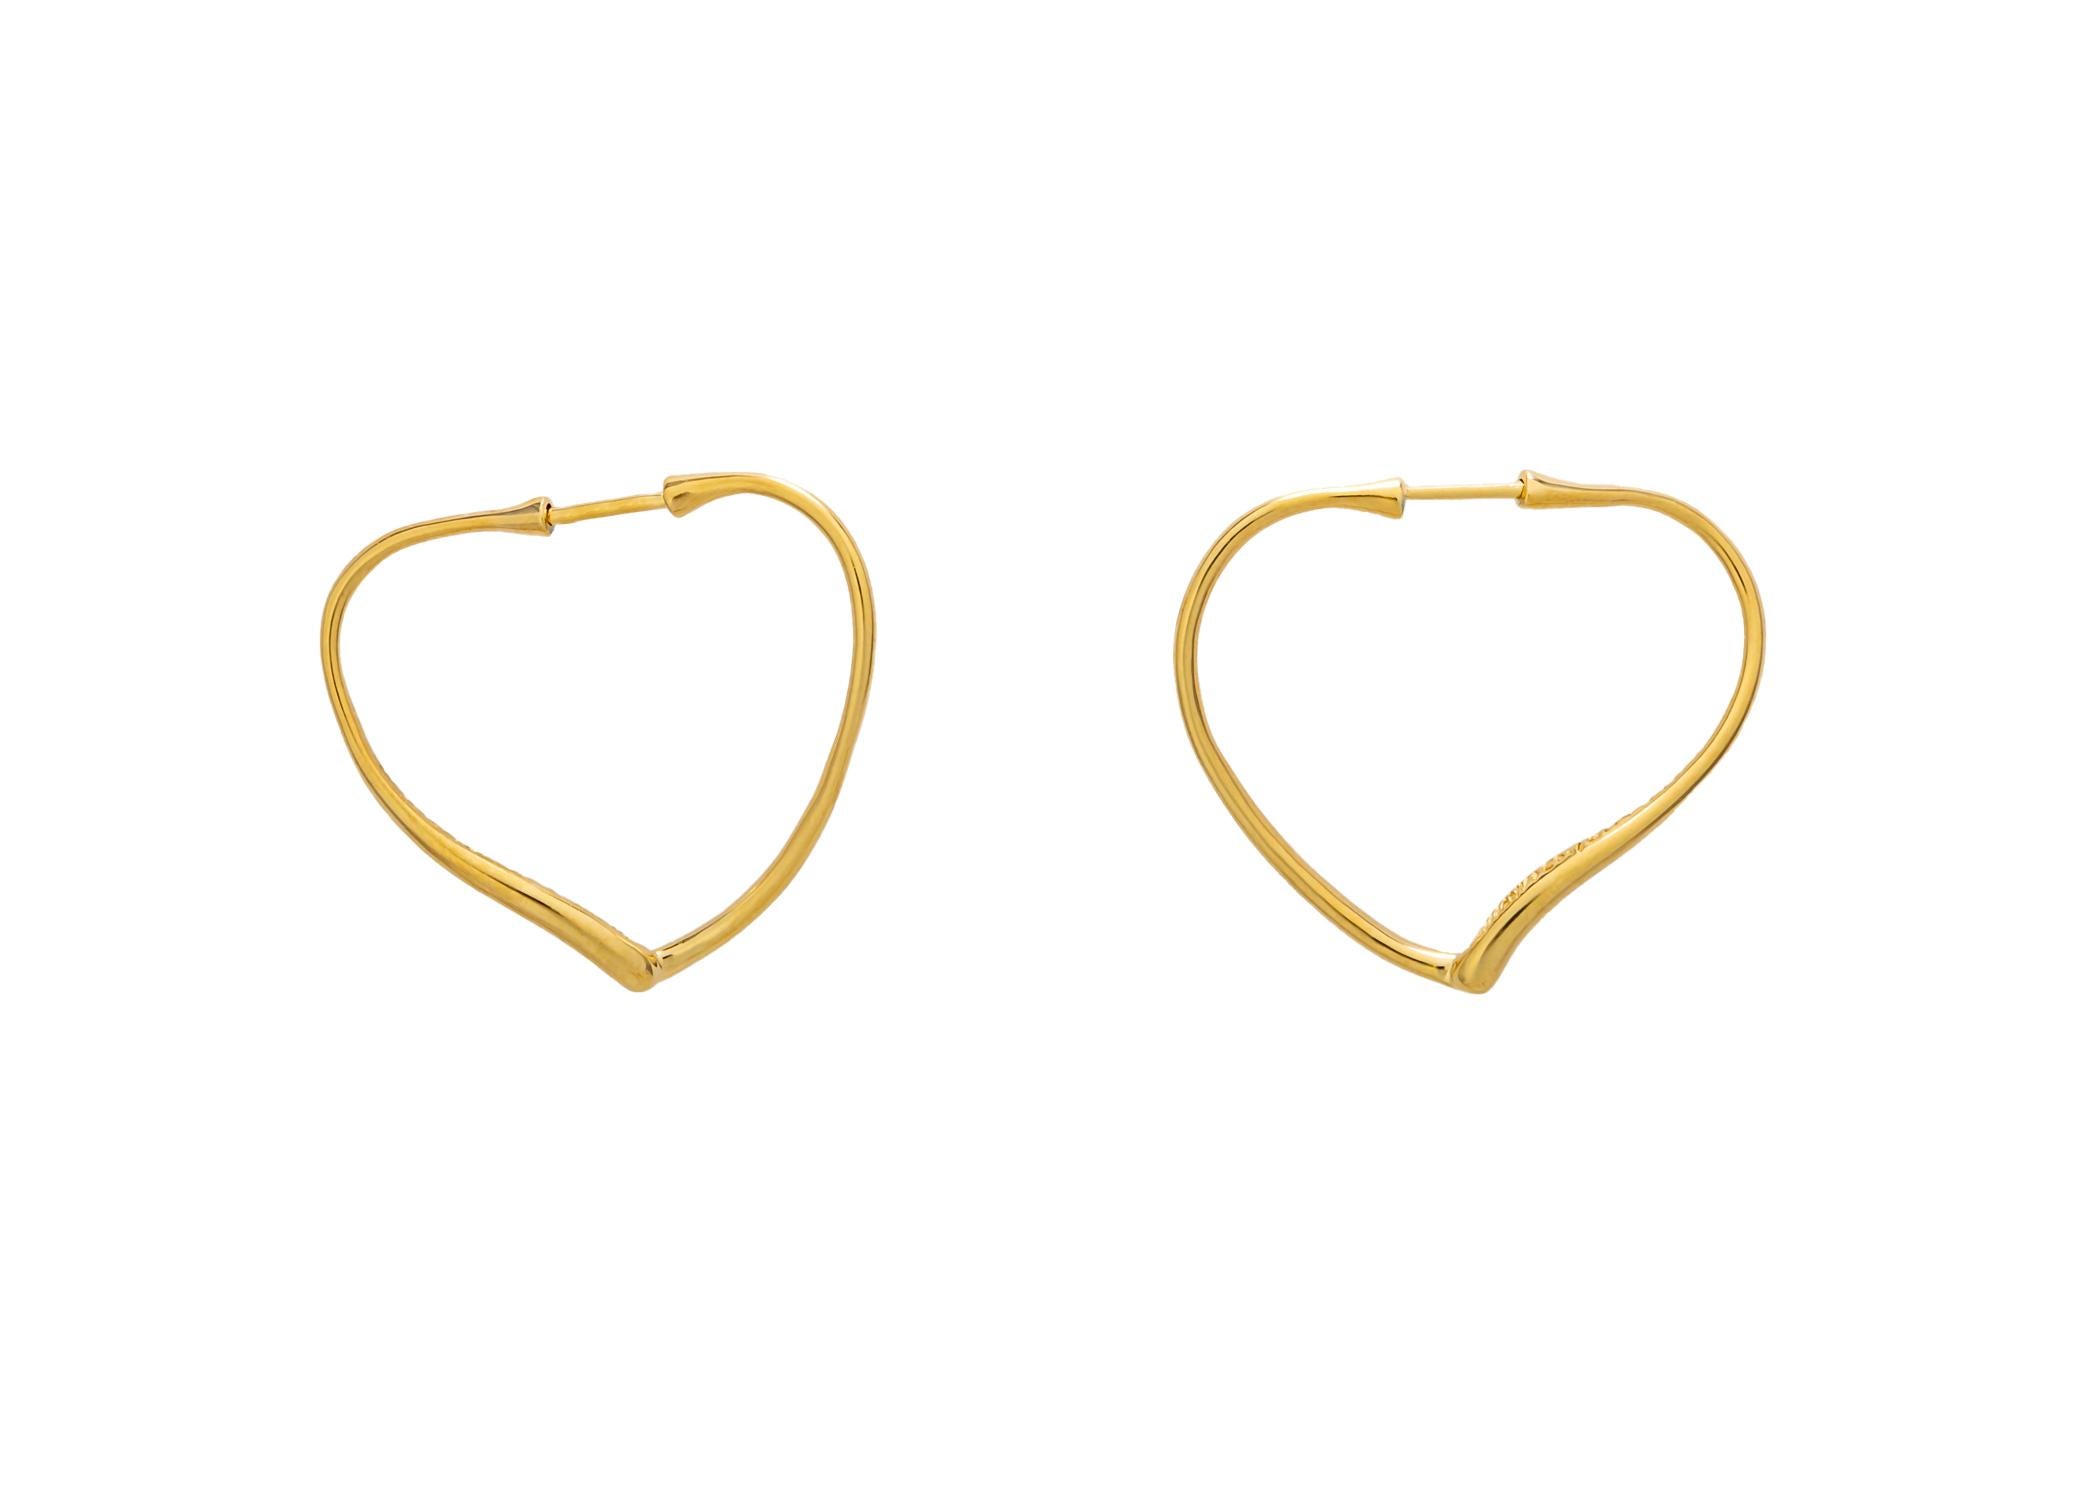 Elsa Peretti makes a simple hoop earring unique and interesting. Her freeform heart design is a wearable addition to any jewelry wardrobe. 1 1/4 x 1 1/8 inches in size. 